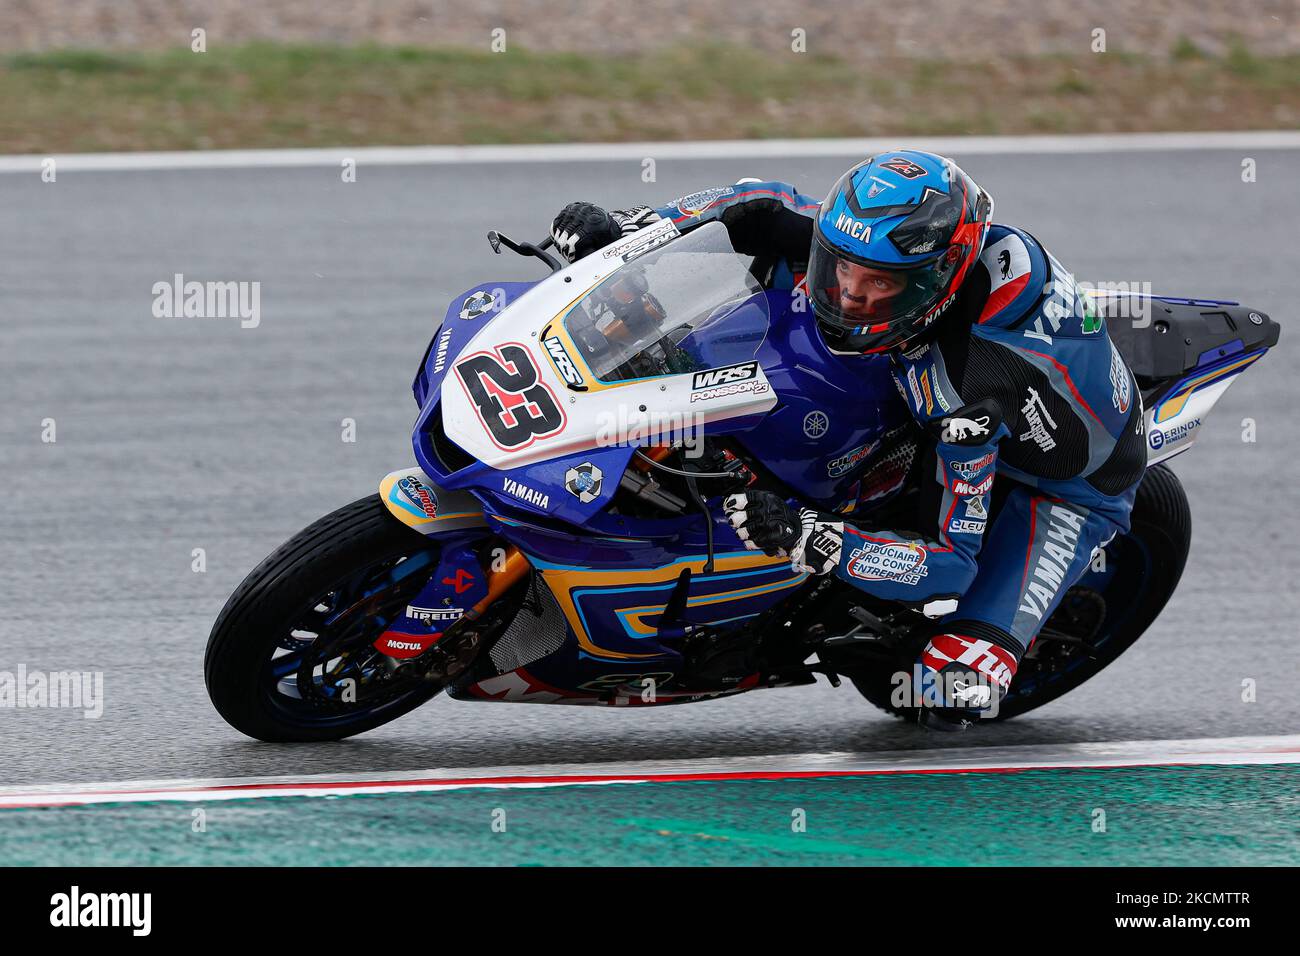 Christophe Ponsson of Gil Motor Sport ? Yamaha with Yamaha YZF R1 during the Race 1 of Hyundai N Catalunya WorldSBK Round of FIM World Superbike Championship at Circuit de Catalunya in Barcelona, Spain. (Photo by DAX Images/NurPhoto) Stock Photo